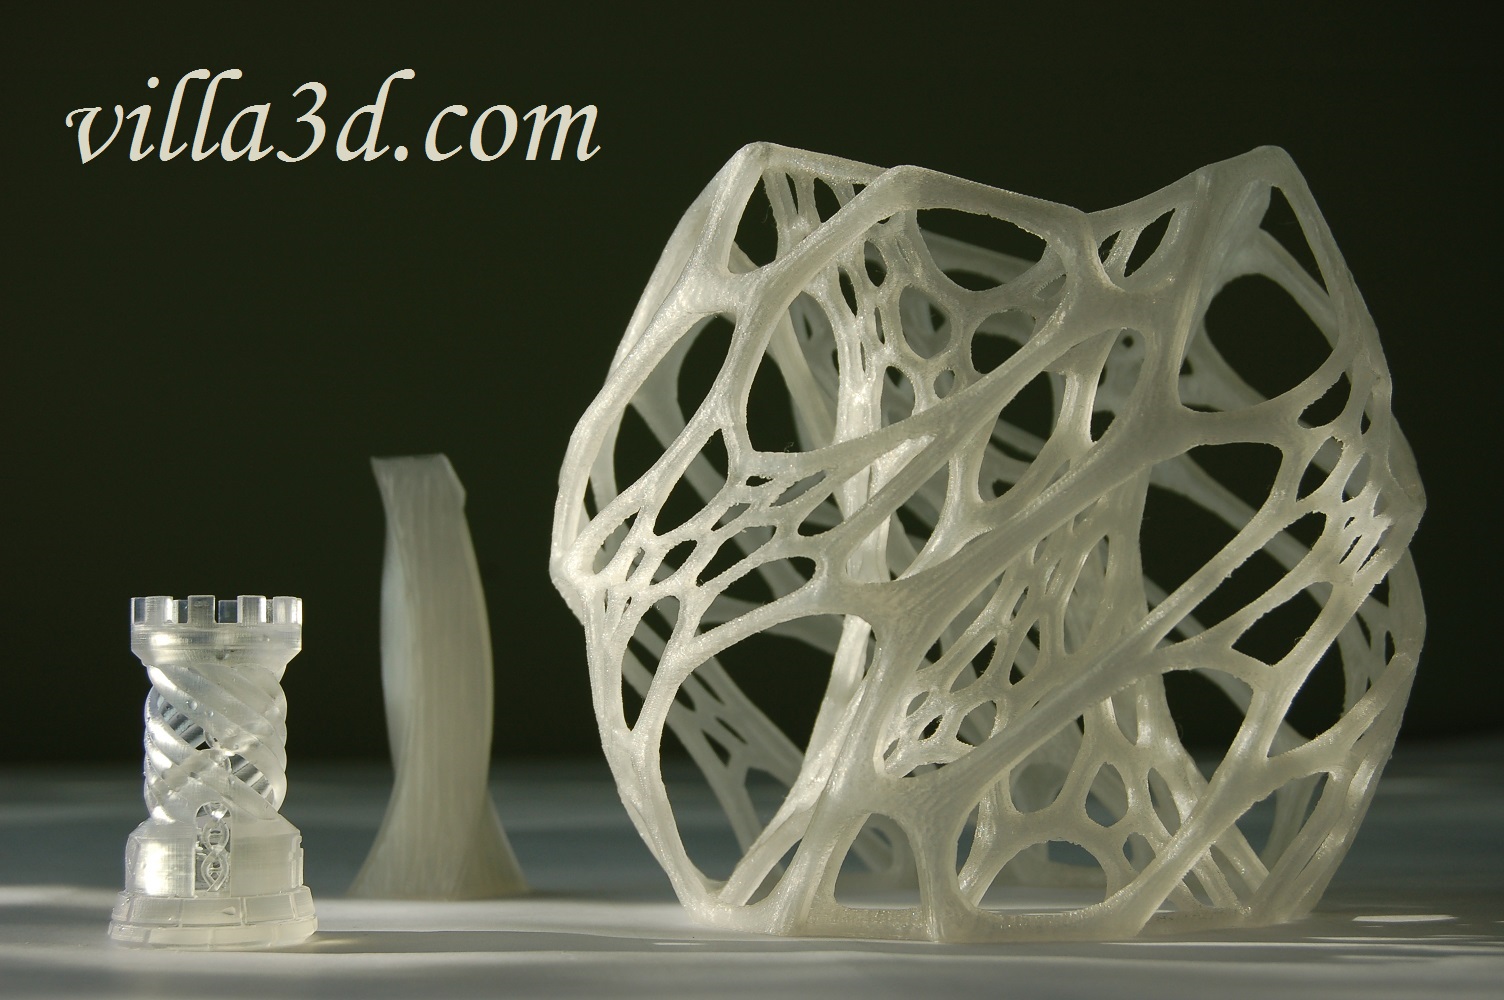 Website about 3D printing